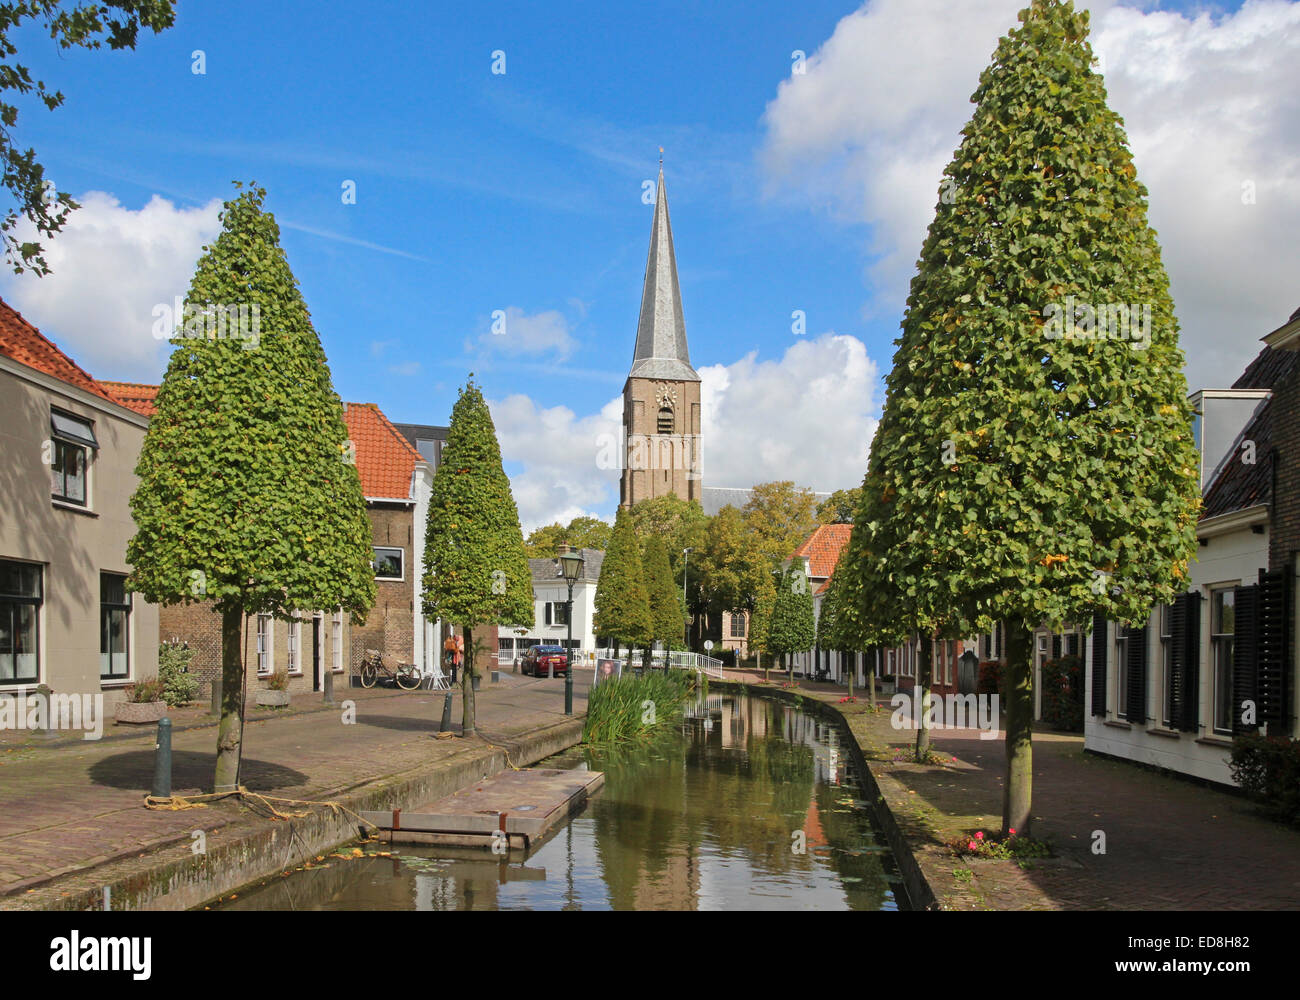 View along a canal in Maasland towards the Oude Kerk. Stock Photo